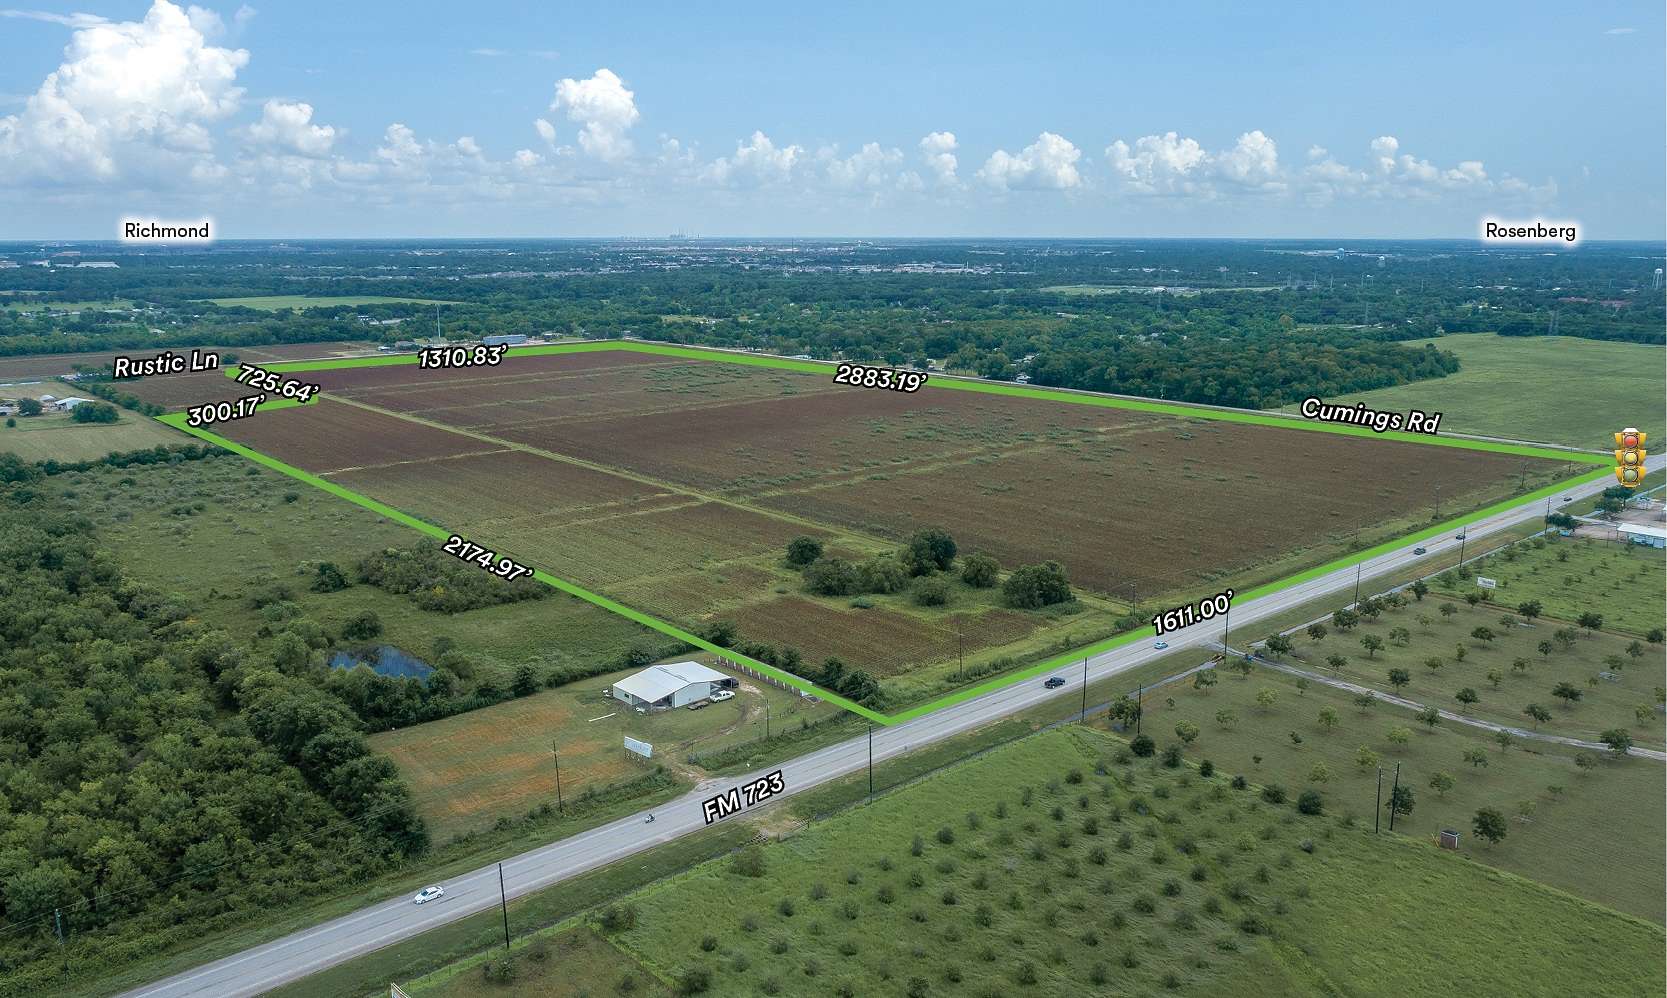 101.95 Acres of Mixed-Use Land for Sale in Rosenberg, Texas